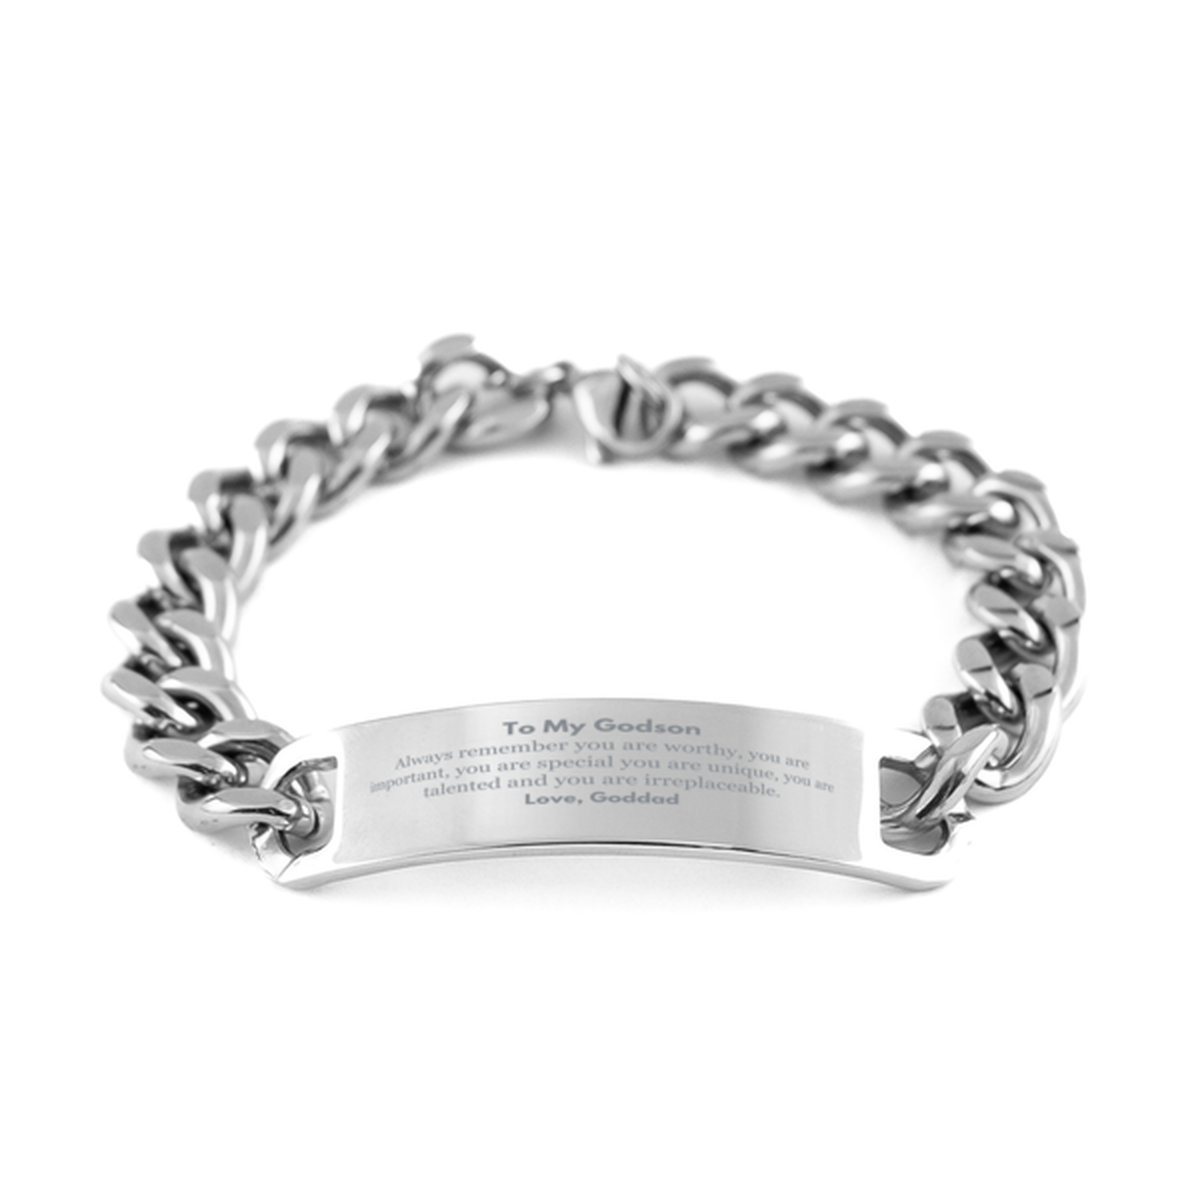 Godson Birthday Gifts from Goddad, Inspirational Cuban Chain Stainless Steel Bracelet for Godson Christmas Graduation Gifts for Godson Always remember you are worthy, you are important. Love, Goddad